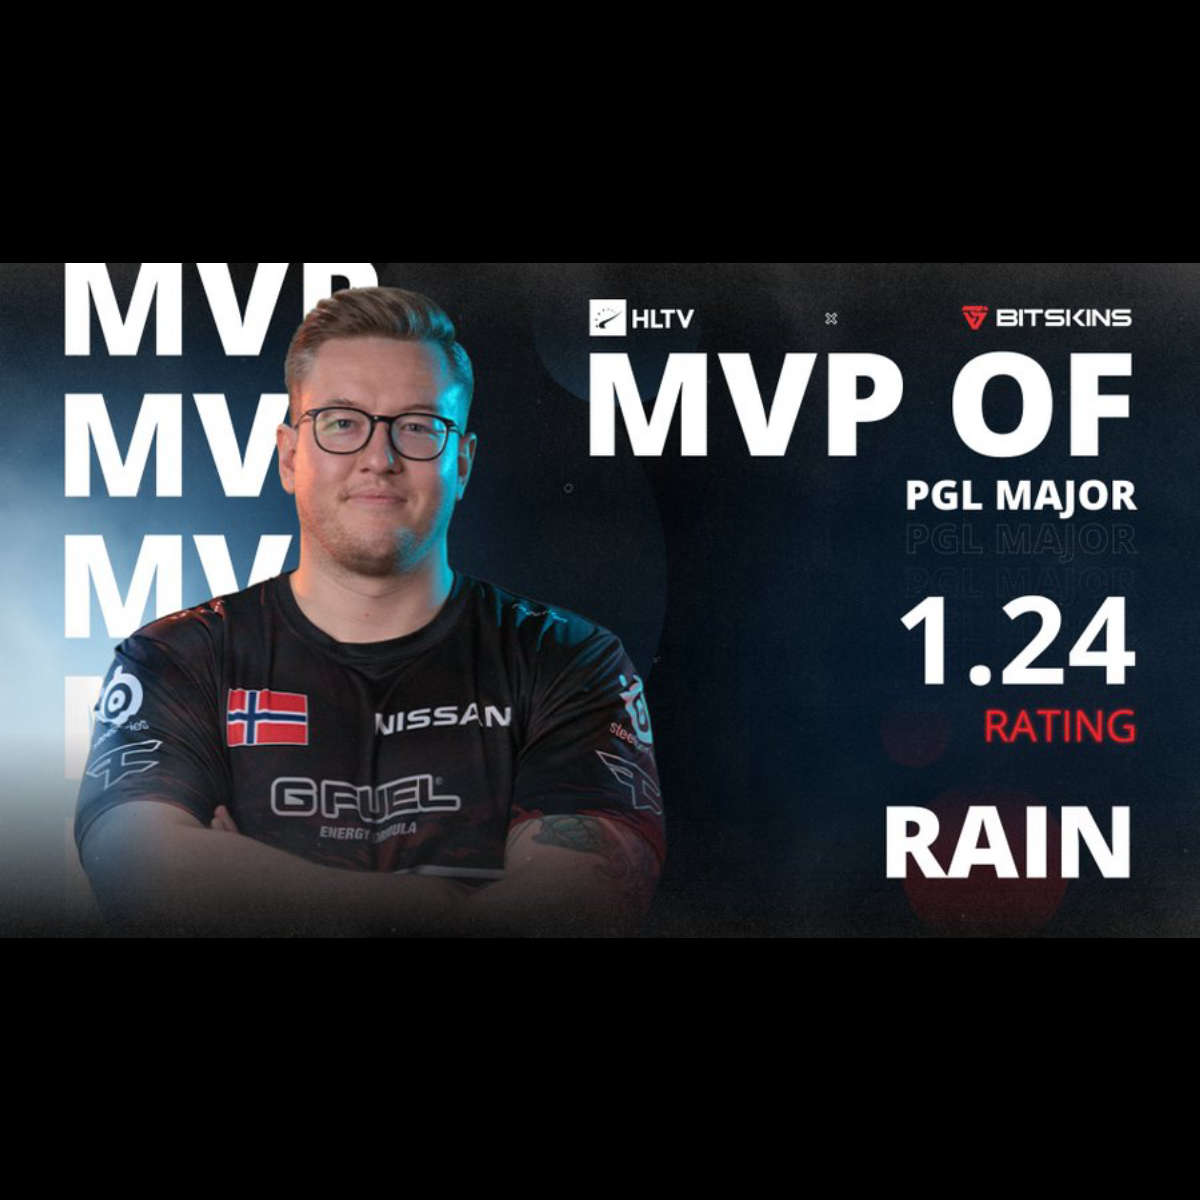 HLTV.org - As rain said in an interview, 27 is the new